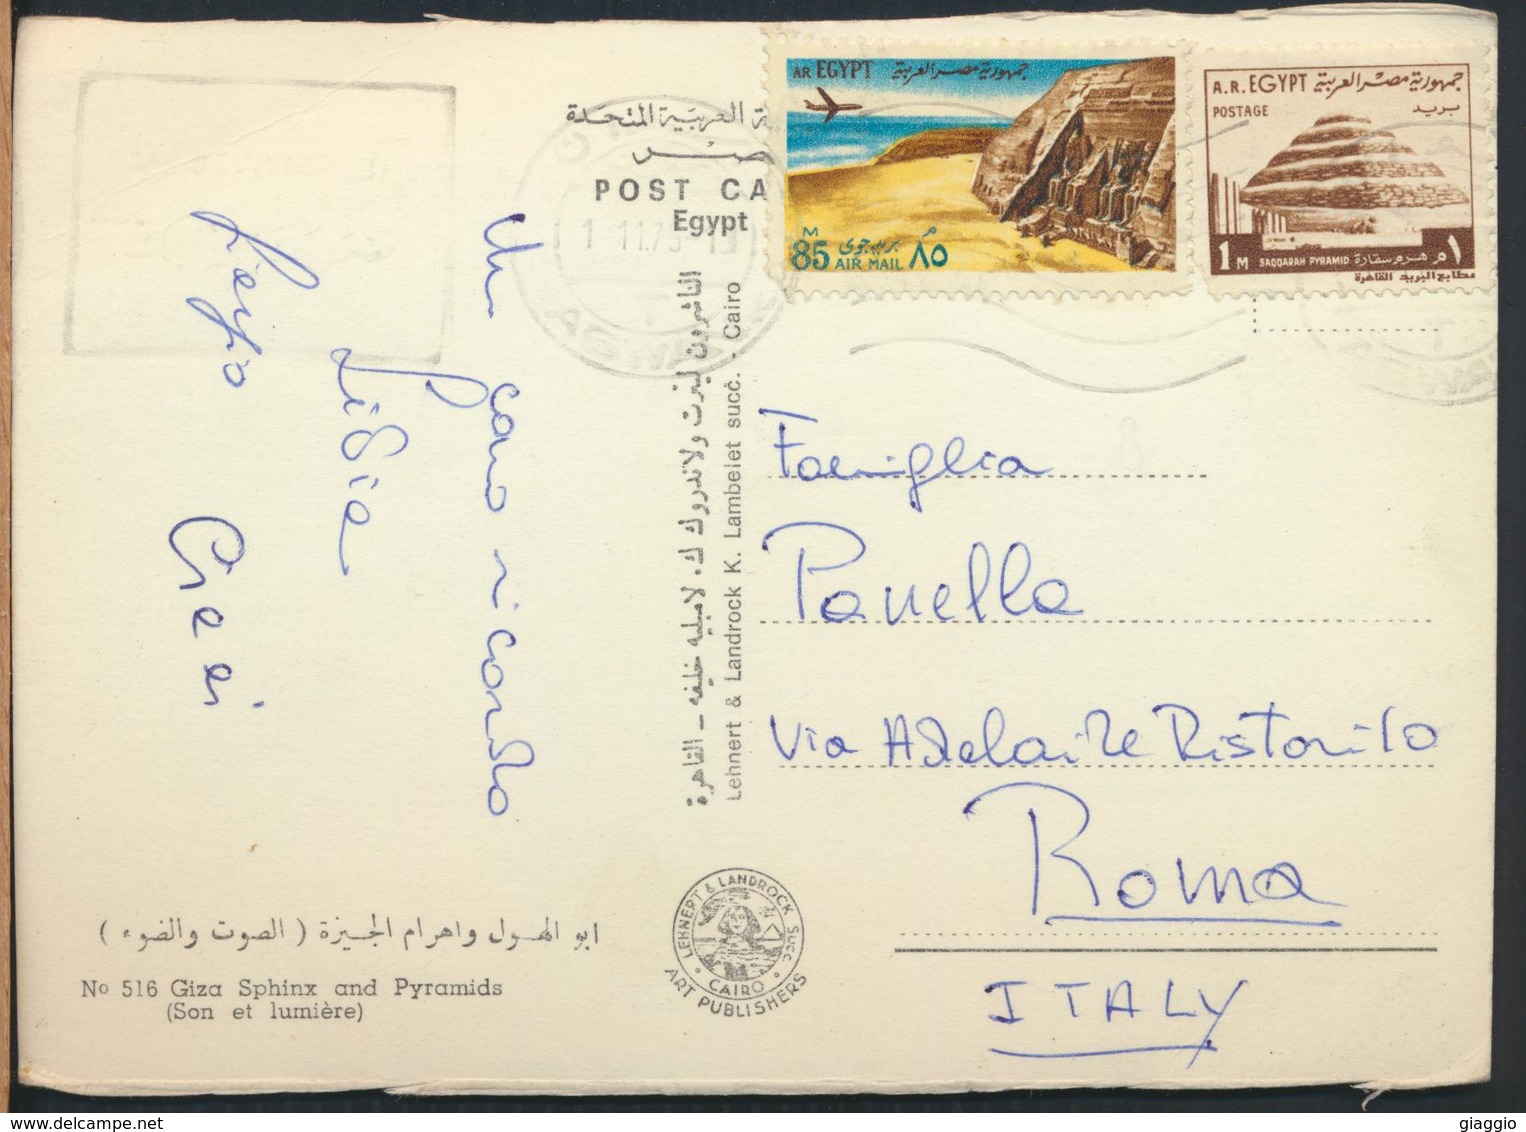 °°° 13098 - EGYPT - GIZA SPHINX AND PYRAMIDS - 1975 With Stamps °°° - Sfinge